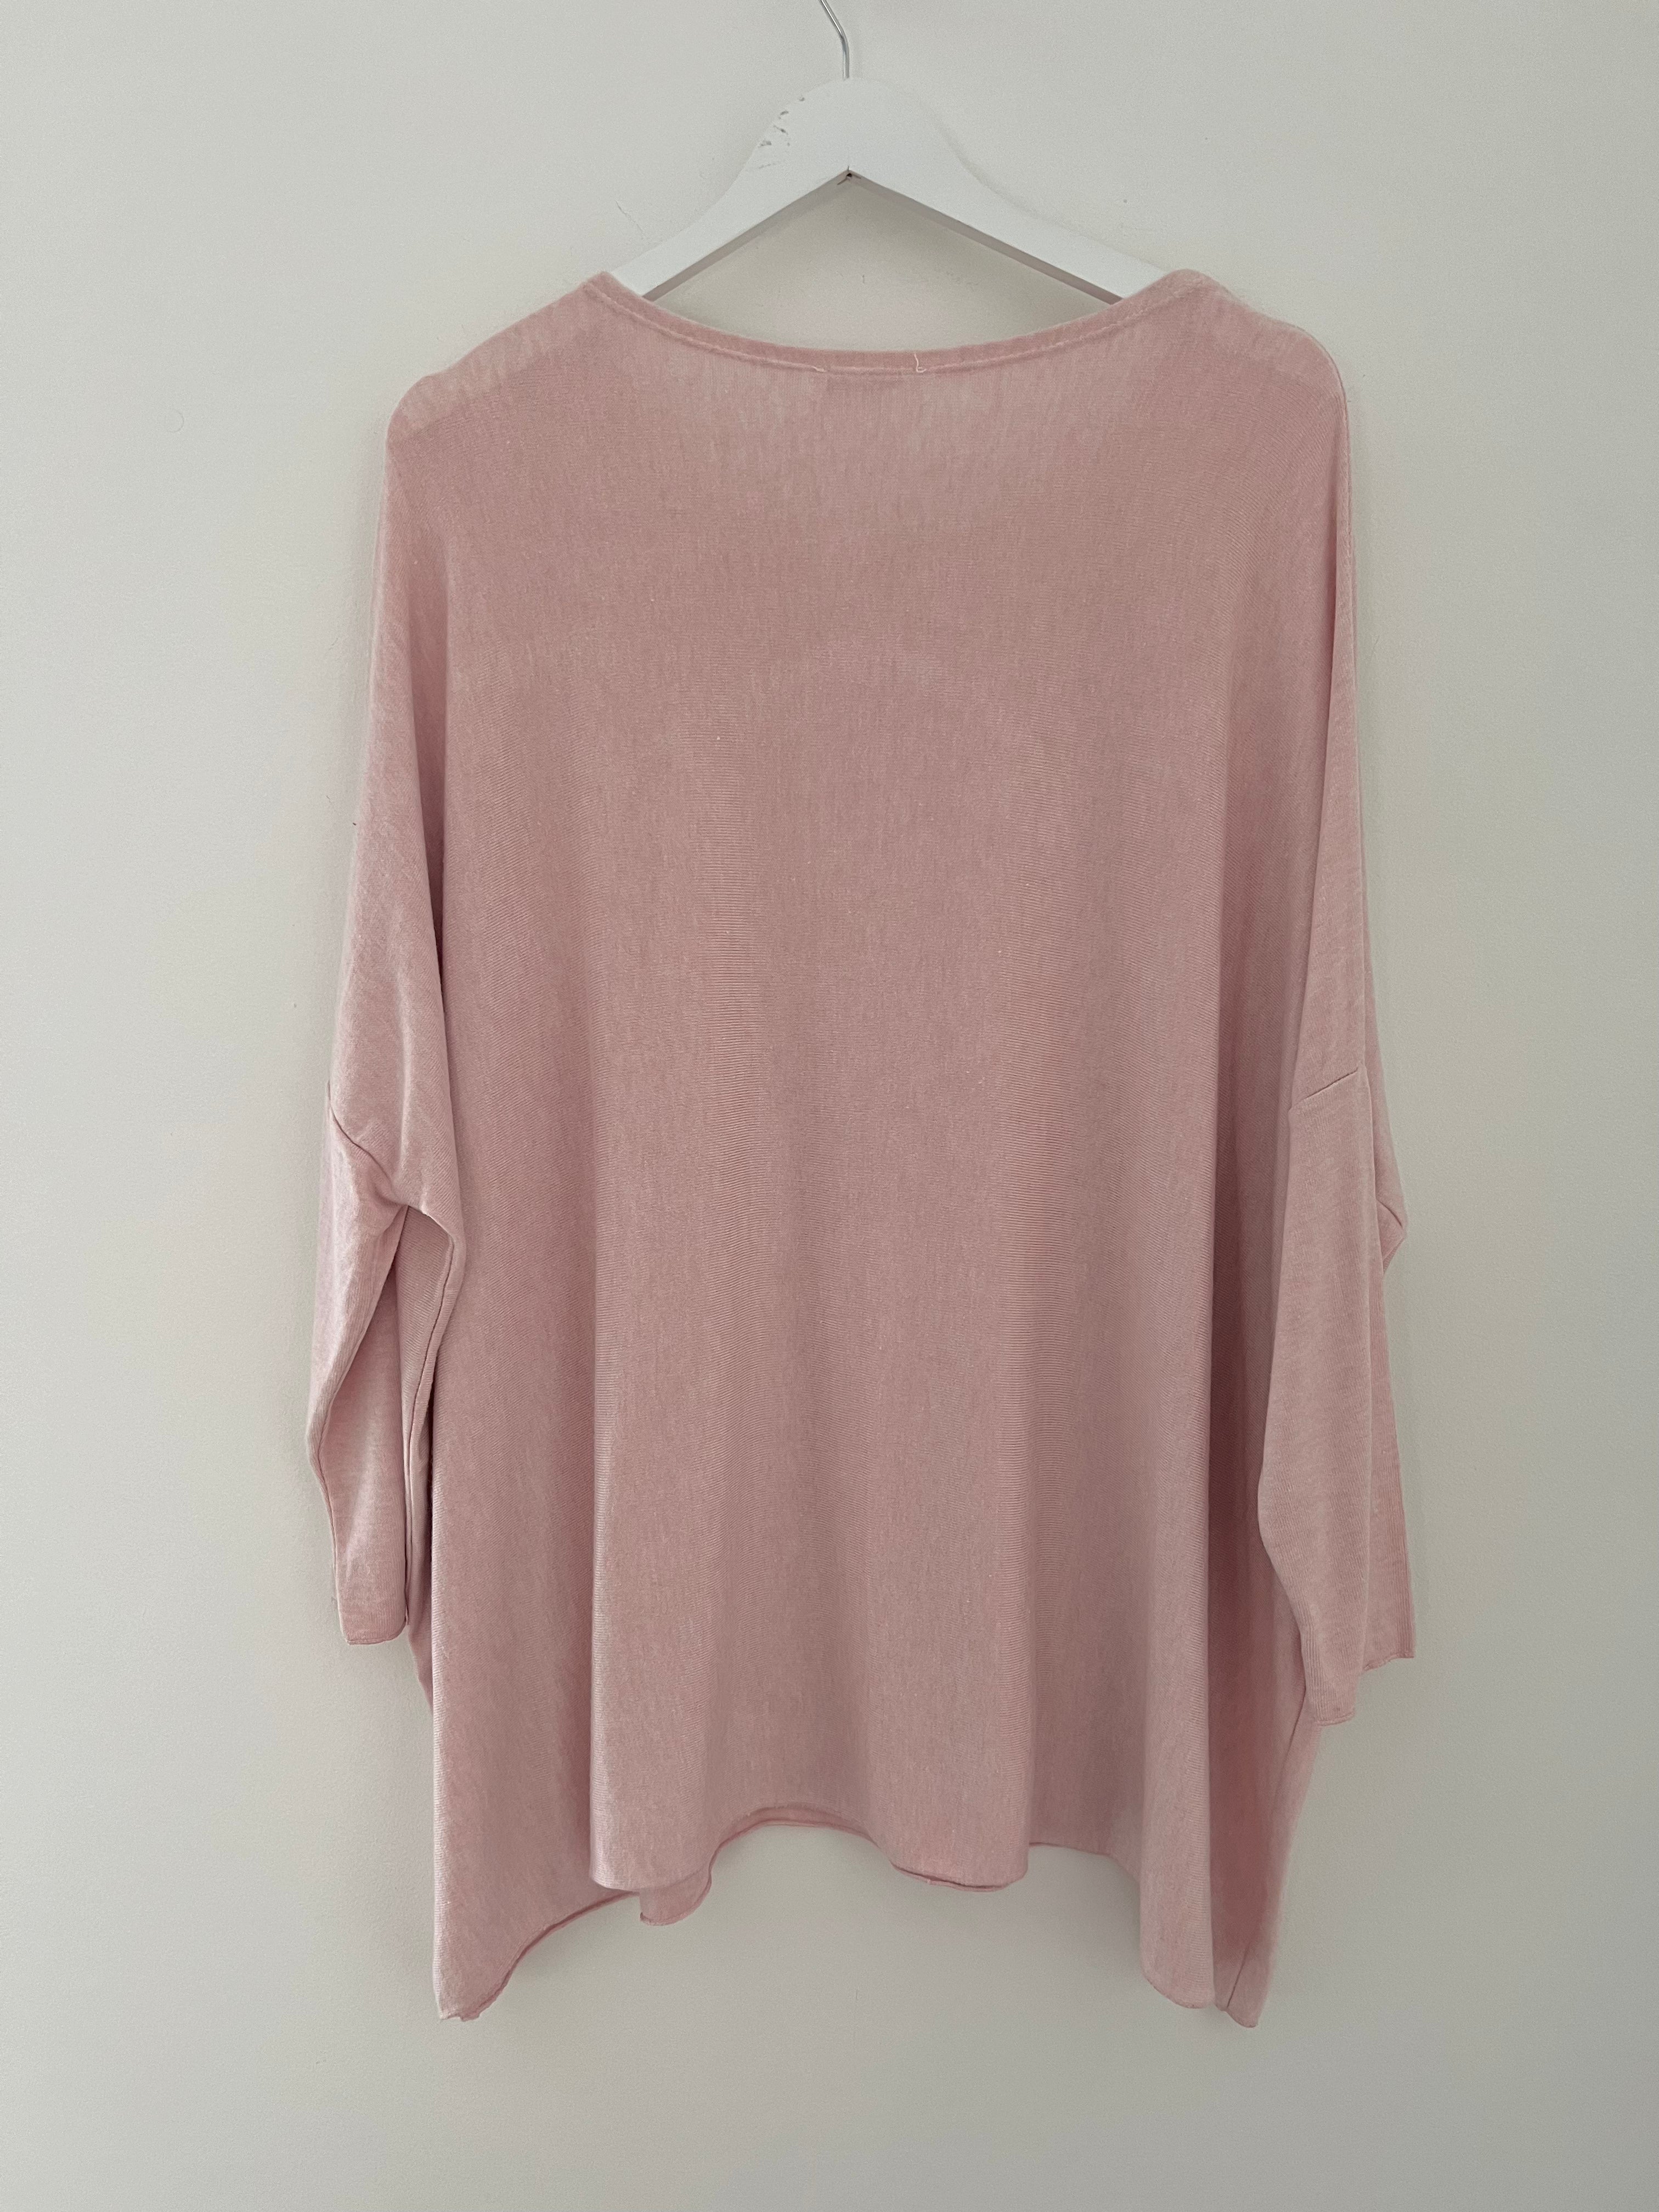 Simple Oversized Jumper in Pale Pink